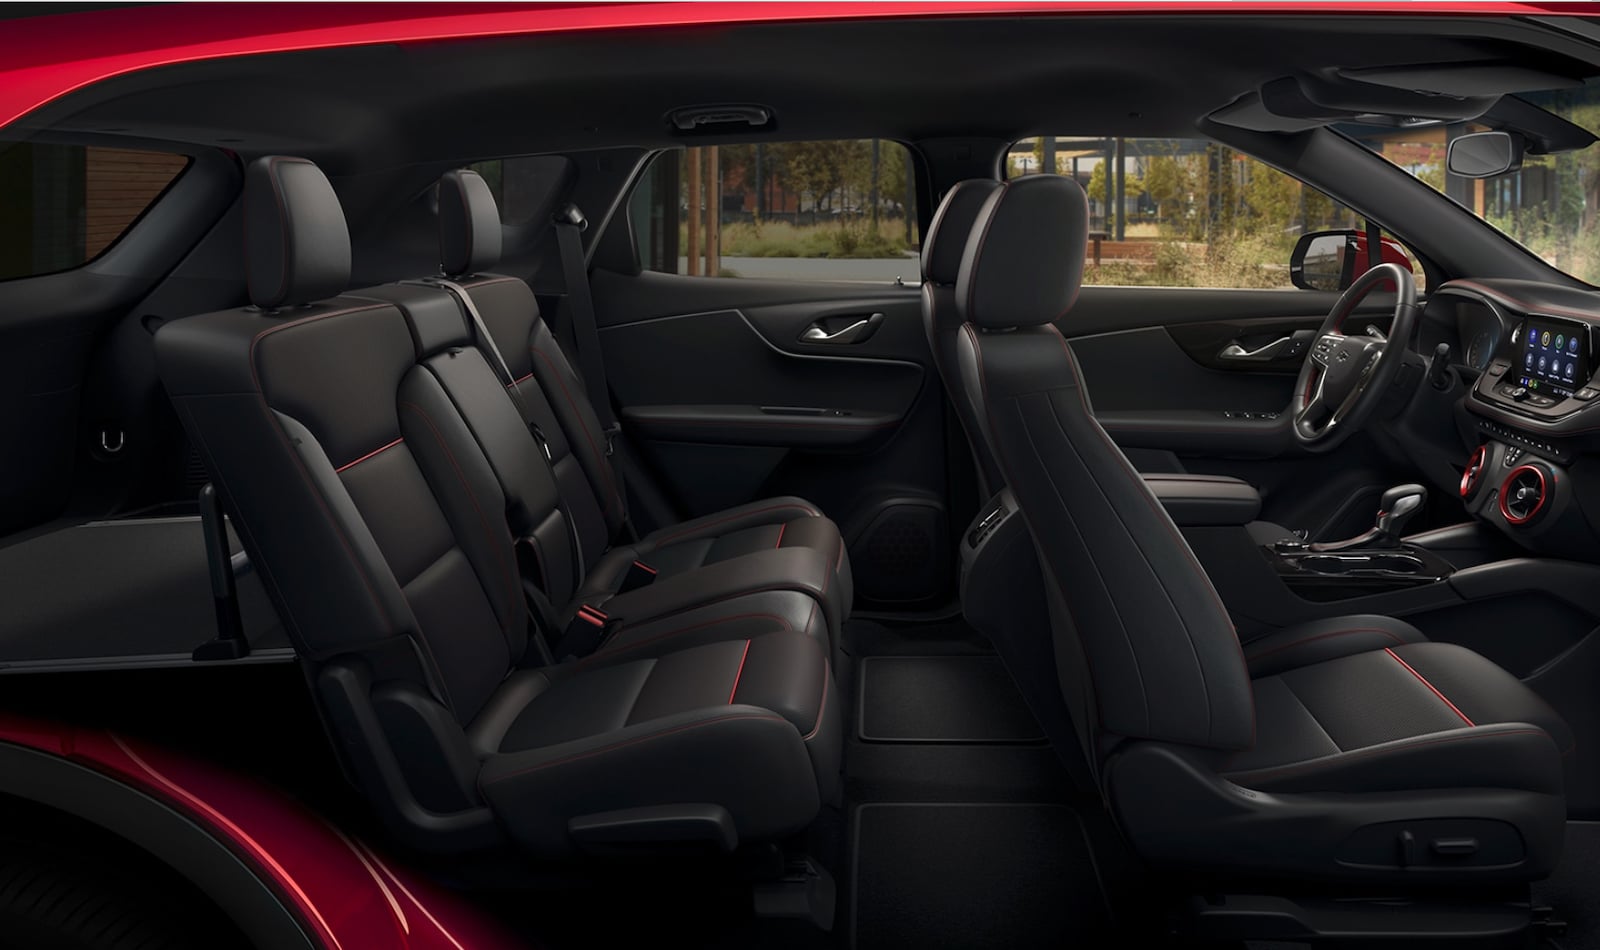 The Blazer seats five people and offers plenty of convenience features, lik...